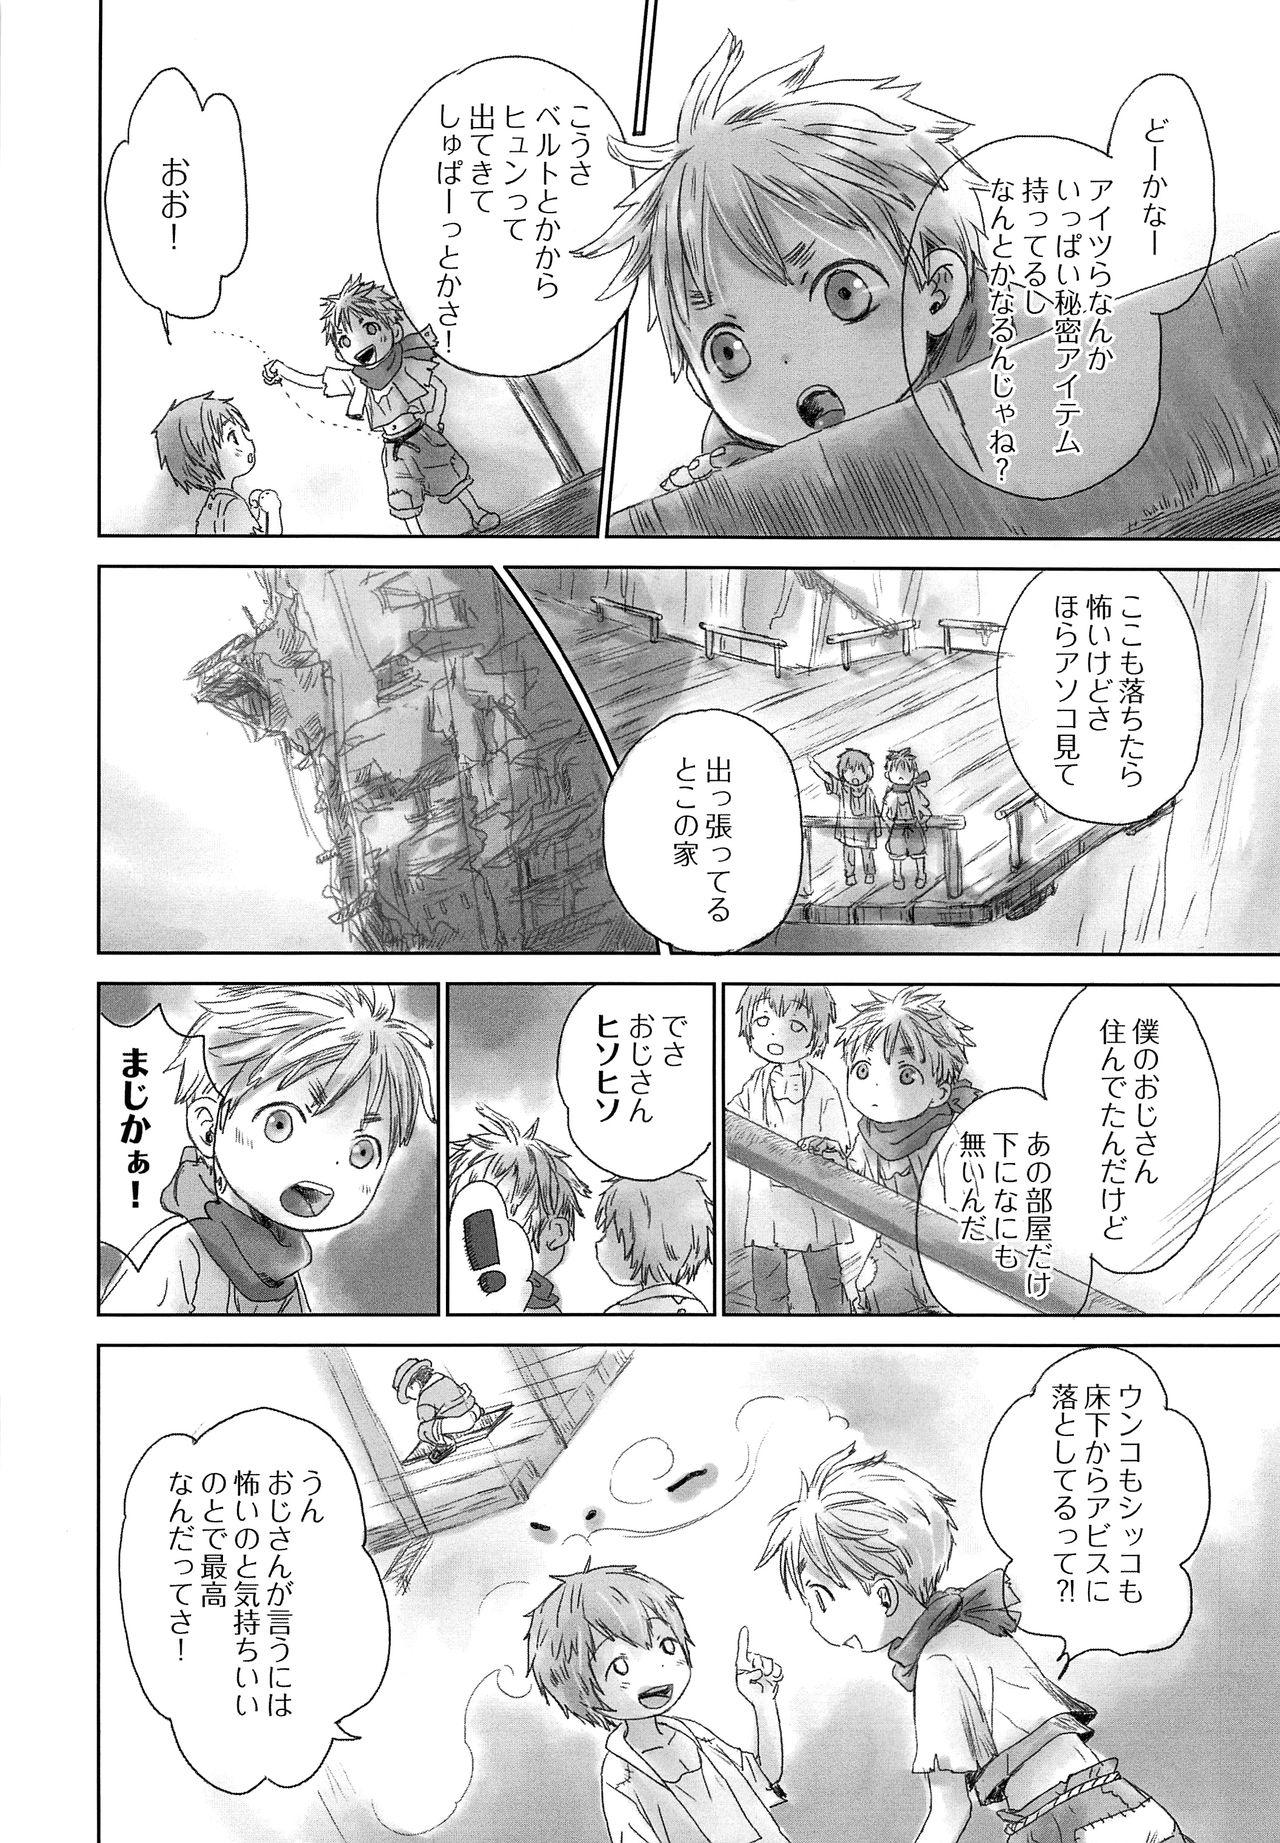 Pasivo Ganpekigai no Nut - Made in abyss Bedroom - Page 5